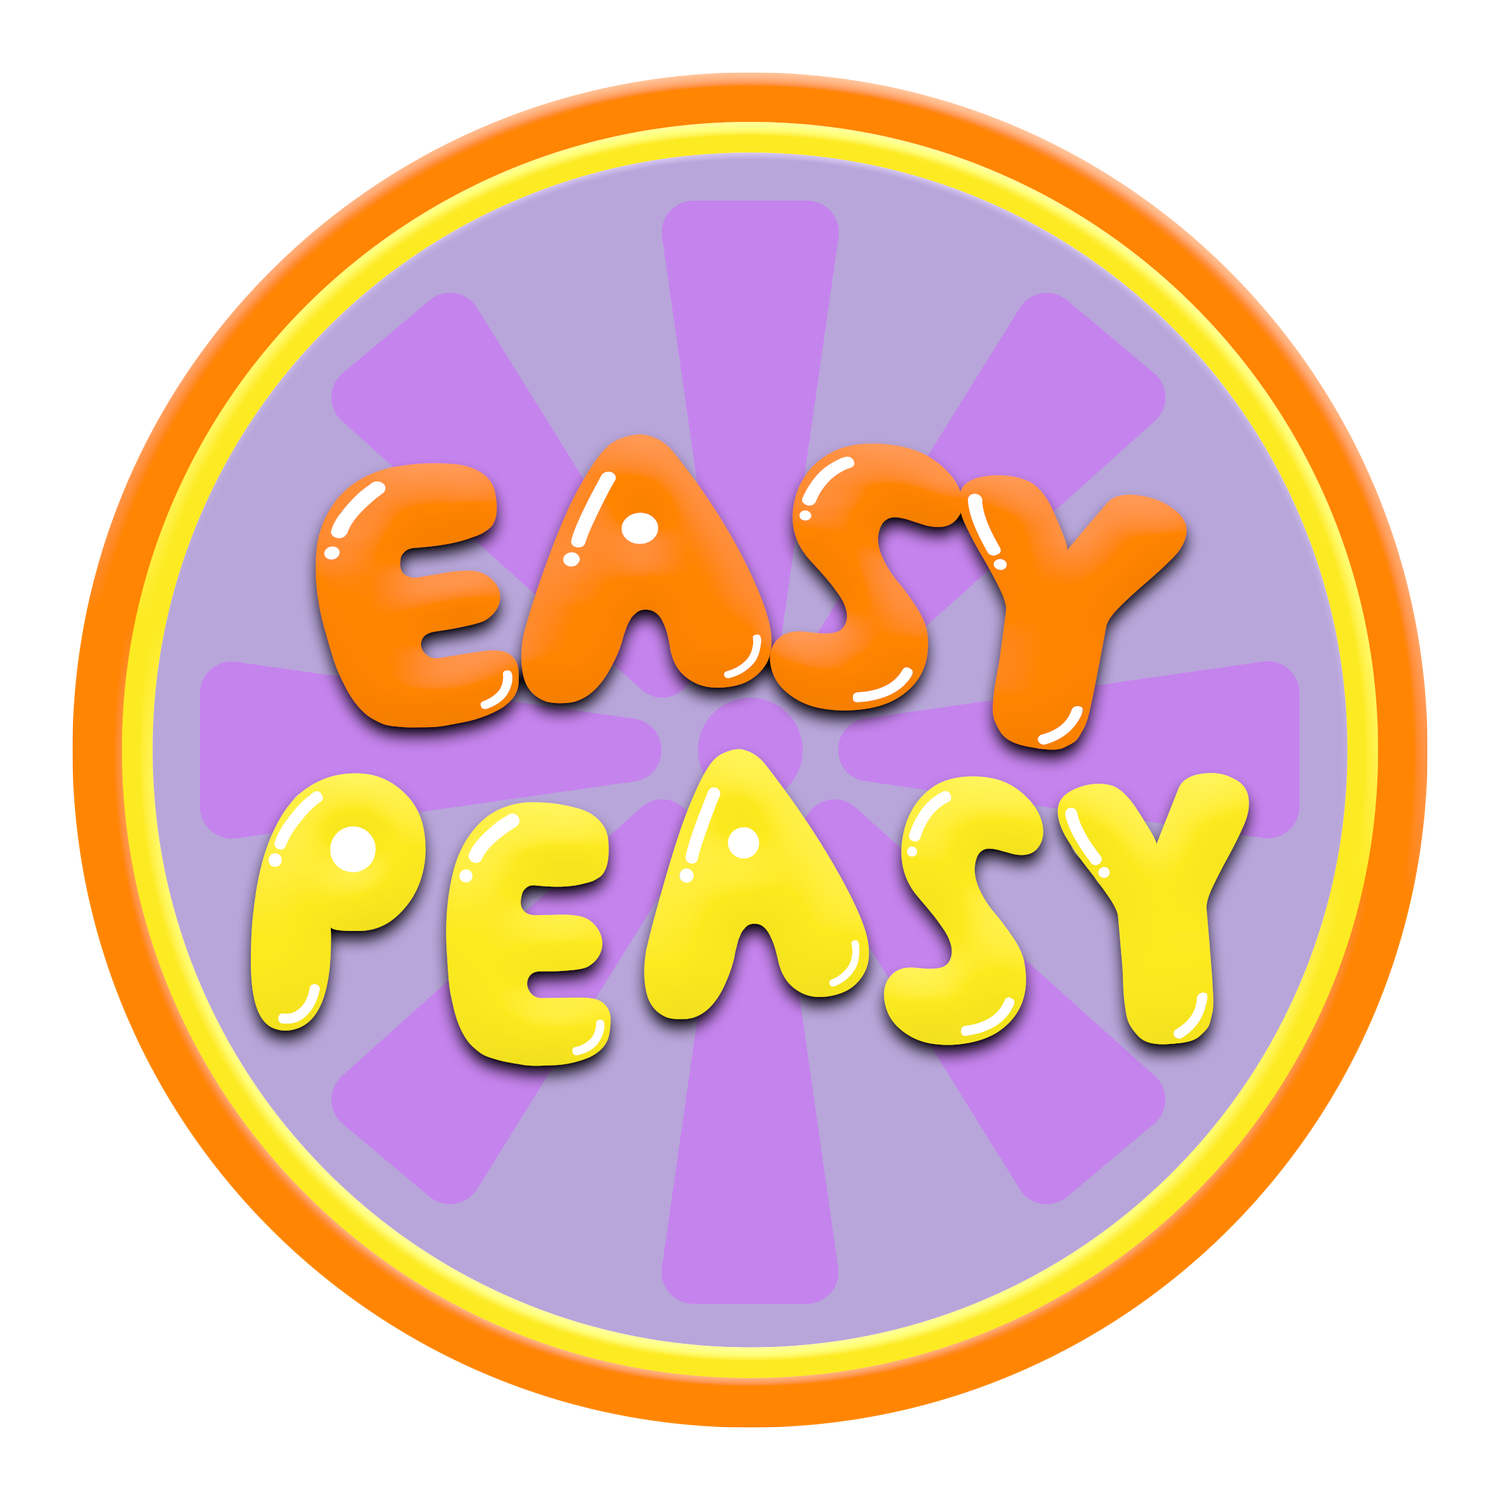 Easy Peasy - Exciting Music and Live Shows for Kids!